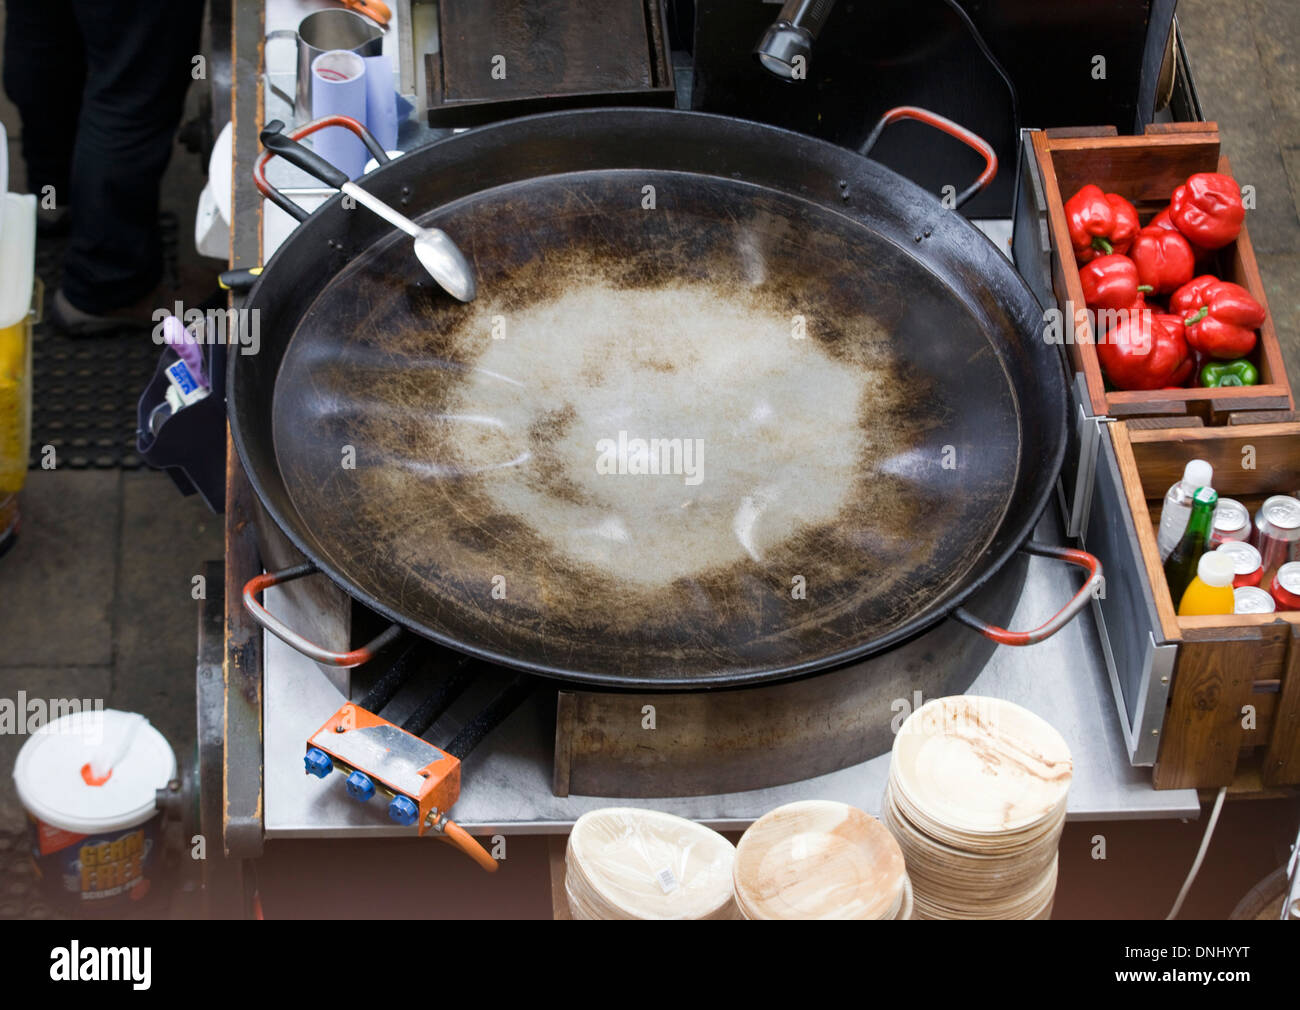 https://c8.alamy.com/comp/DNHYYT/empty-giant-wok-with-peppers-and-sauces-on-a-table-in-an-outdoor-market-DNHYYT.jpg